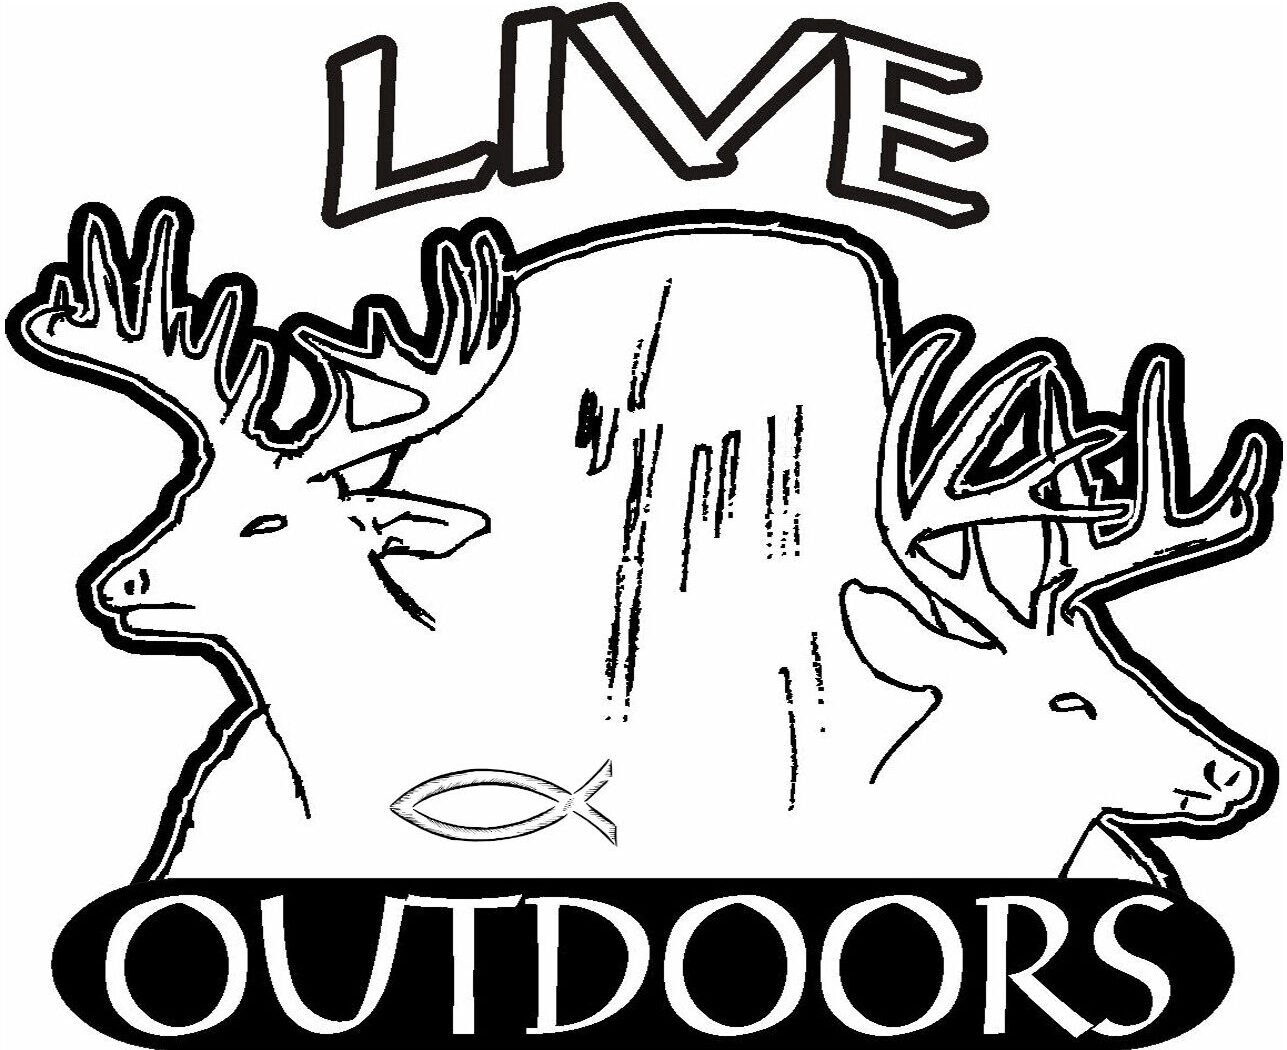 Live Outdoors